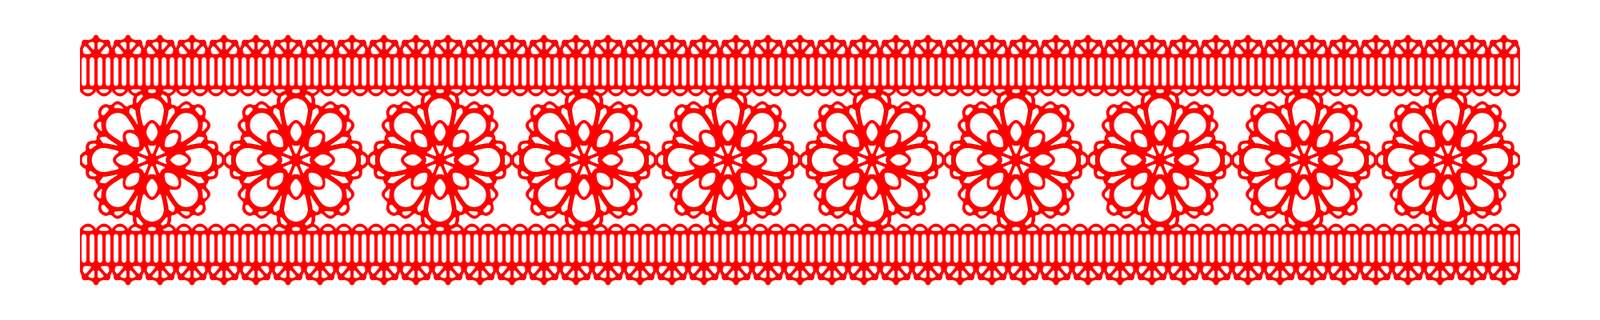 SYED IMRAN: lace.png